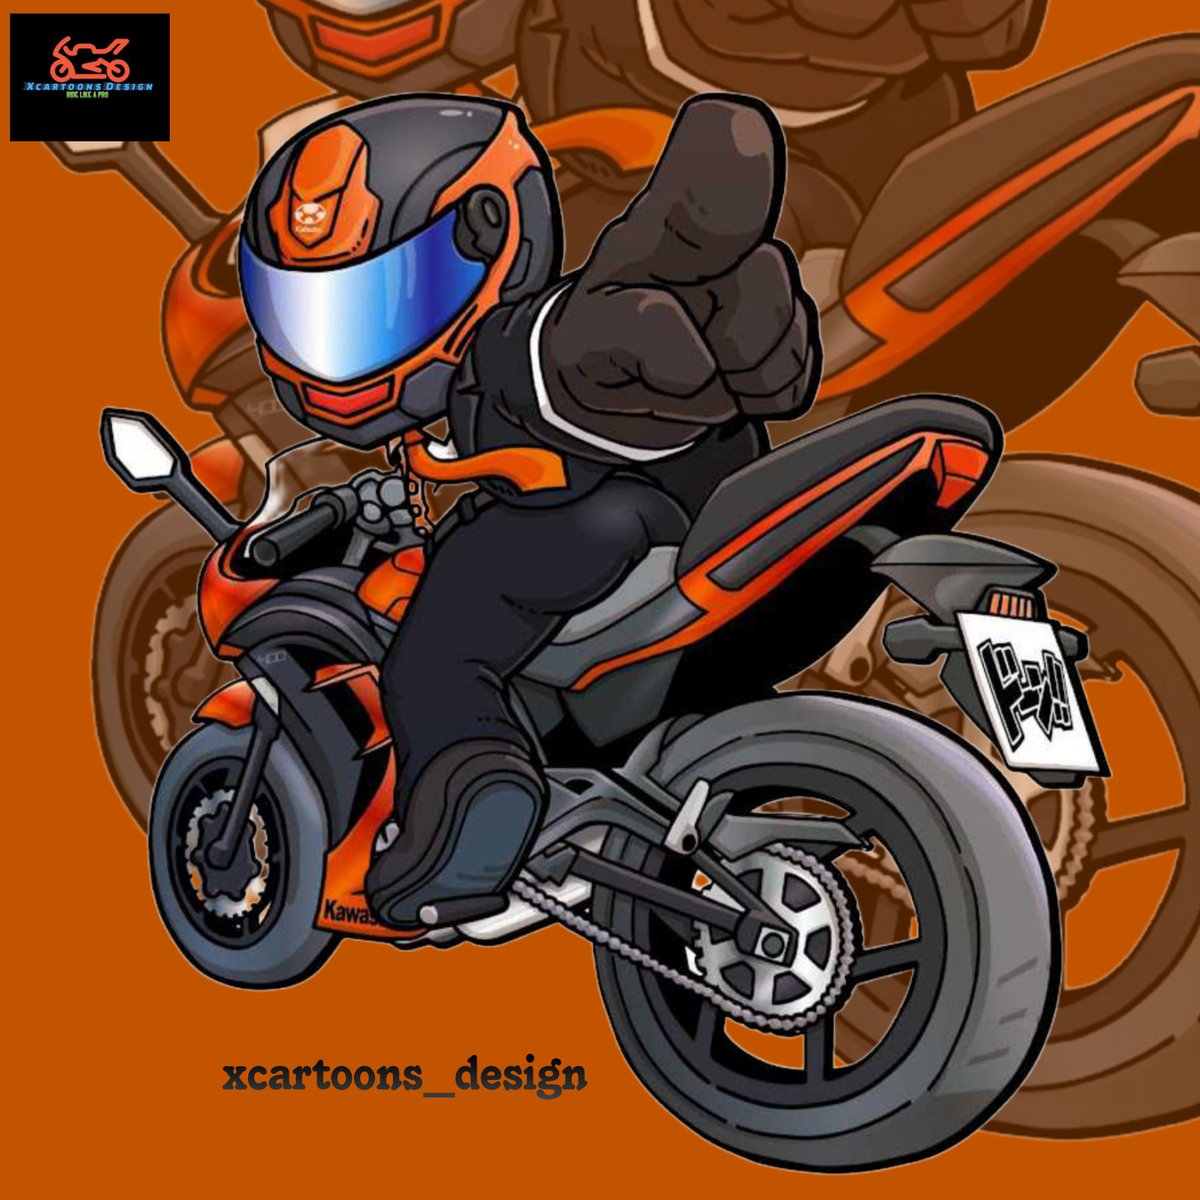 Adding my own unique touch to the motorcycling world with vibrant, lively cartoons.

#indianftr #rolandsandsdesign #motorcycles #motorcyclelife #motorcyclemafia #motorcycletouring #bikelife #bikelovers #BIKER #ktmrc200 #stuntriding #scoutbobber #motorcyclesofinstagram